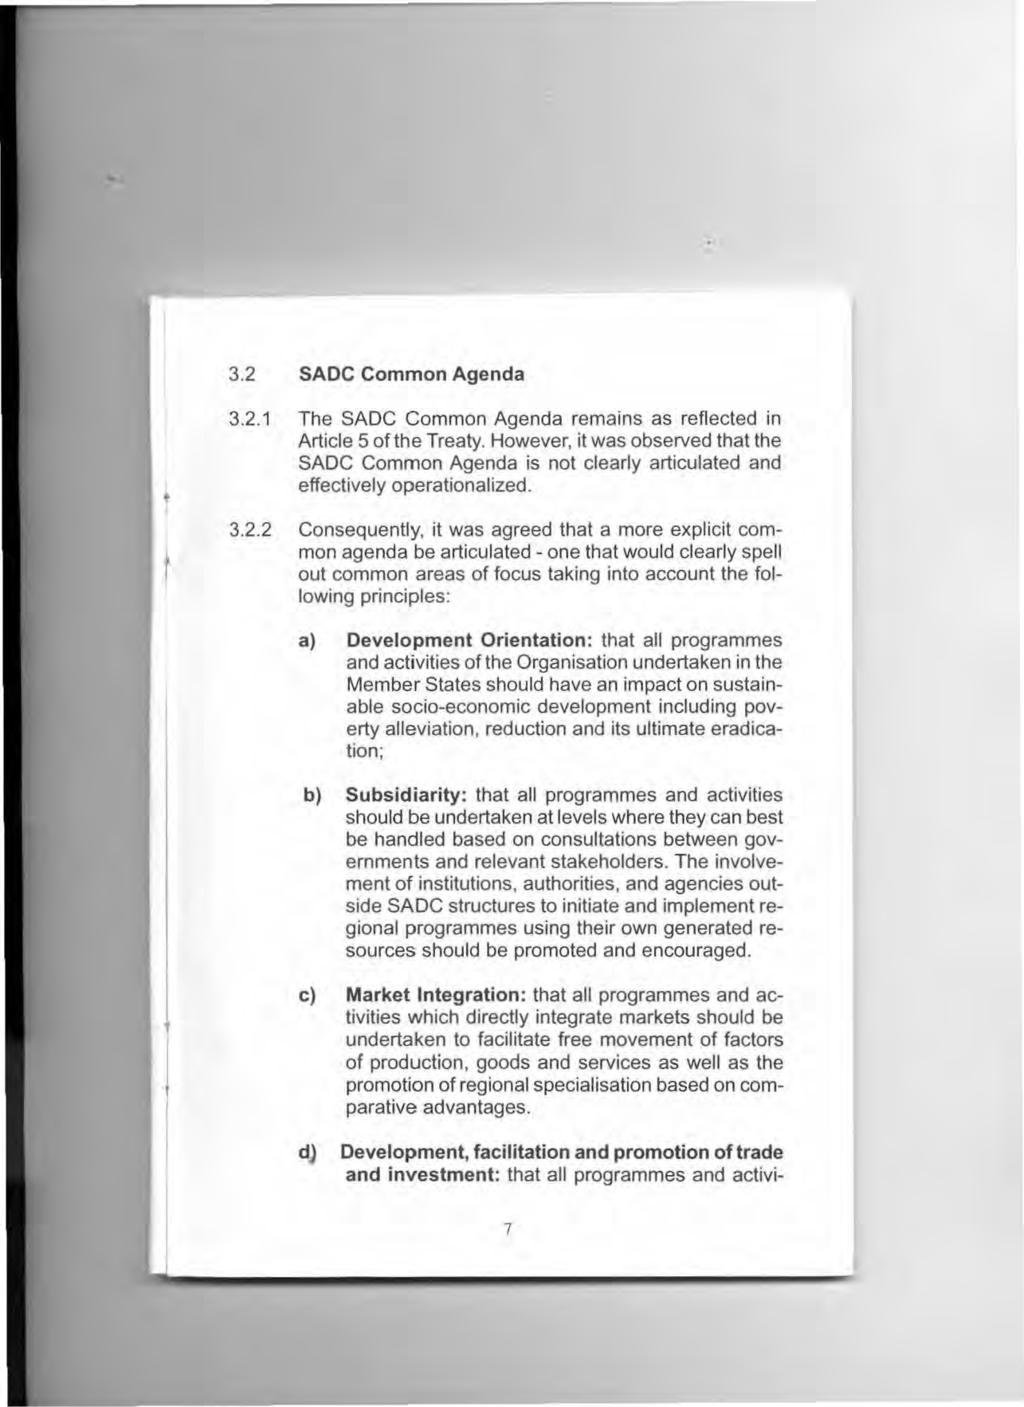 3.2 SADC Common Agenda 3.2.1 The SADC Common Agenda remains as reflected in Article 5 of the Treaty.